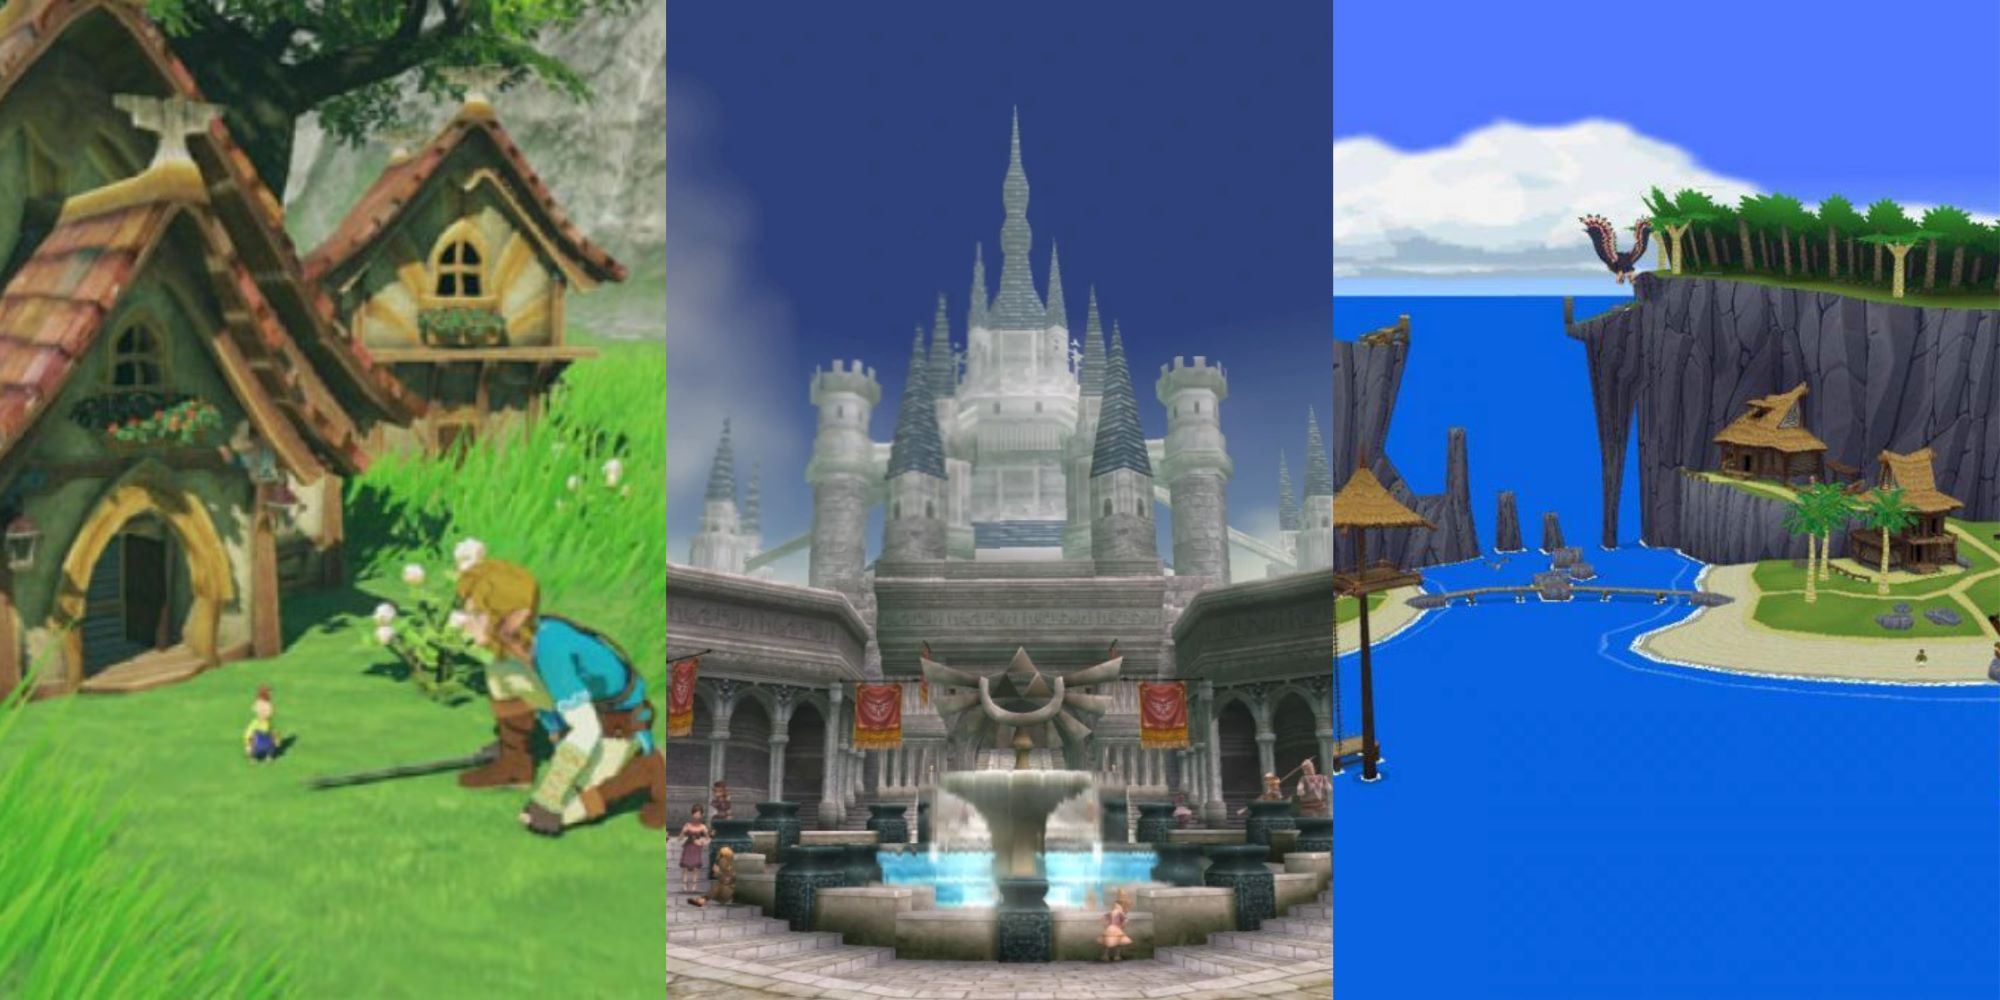 Left - Link among tiny people Breath of the Wild, Center - Hyrule Castle Town Twilight Princess, Right - Outset Island Wind Waker